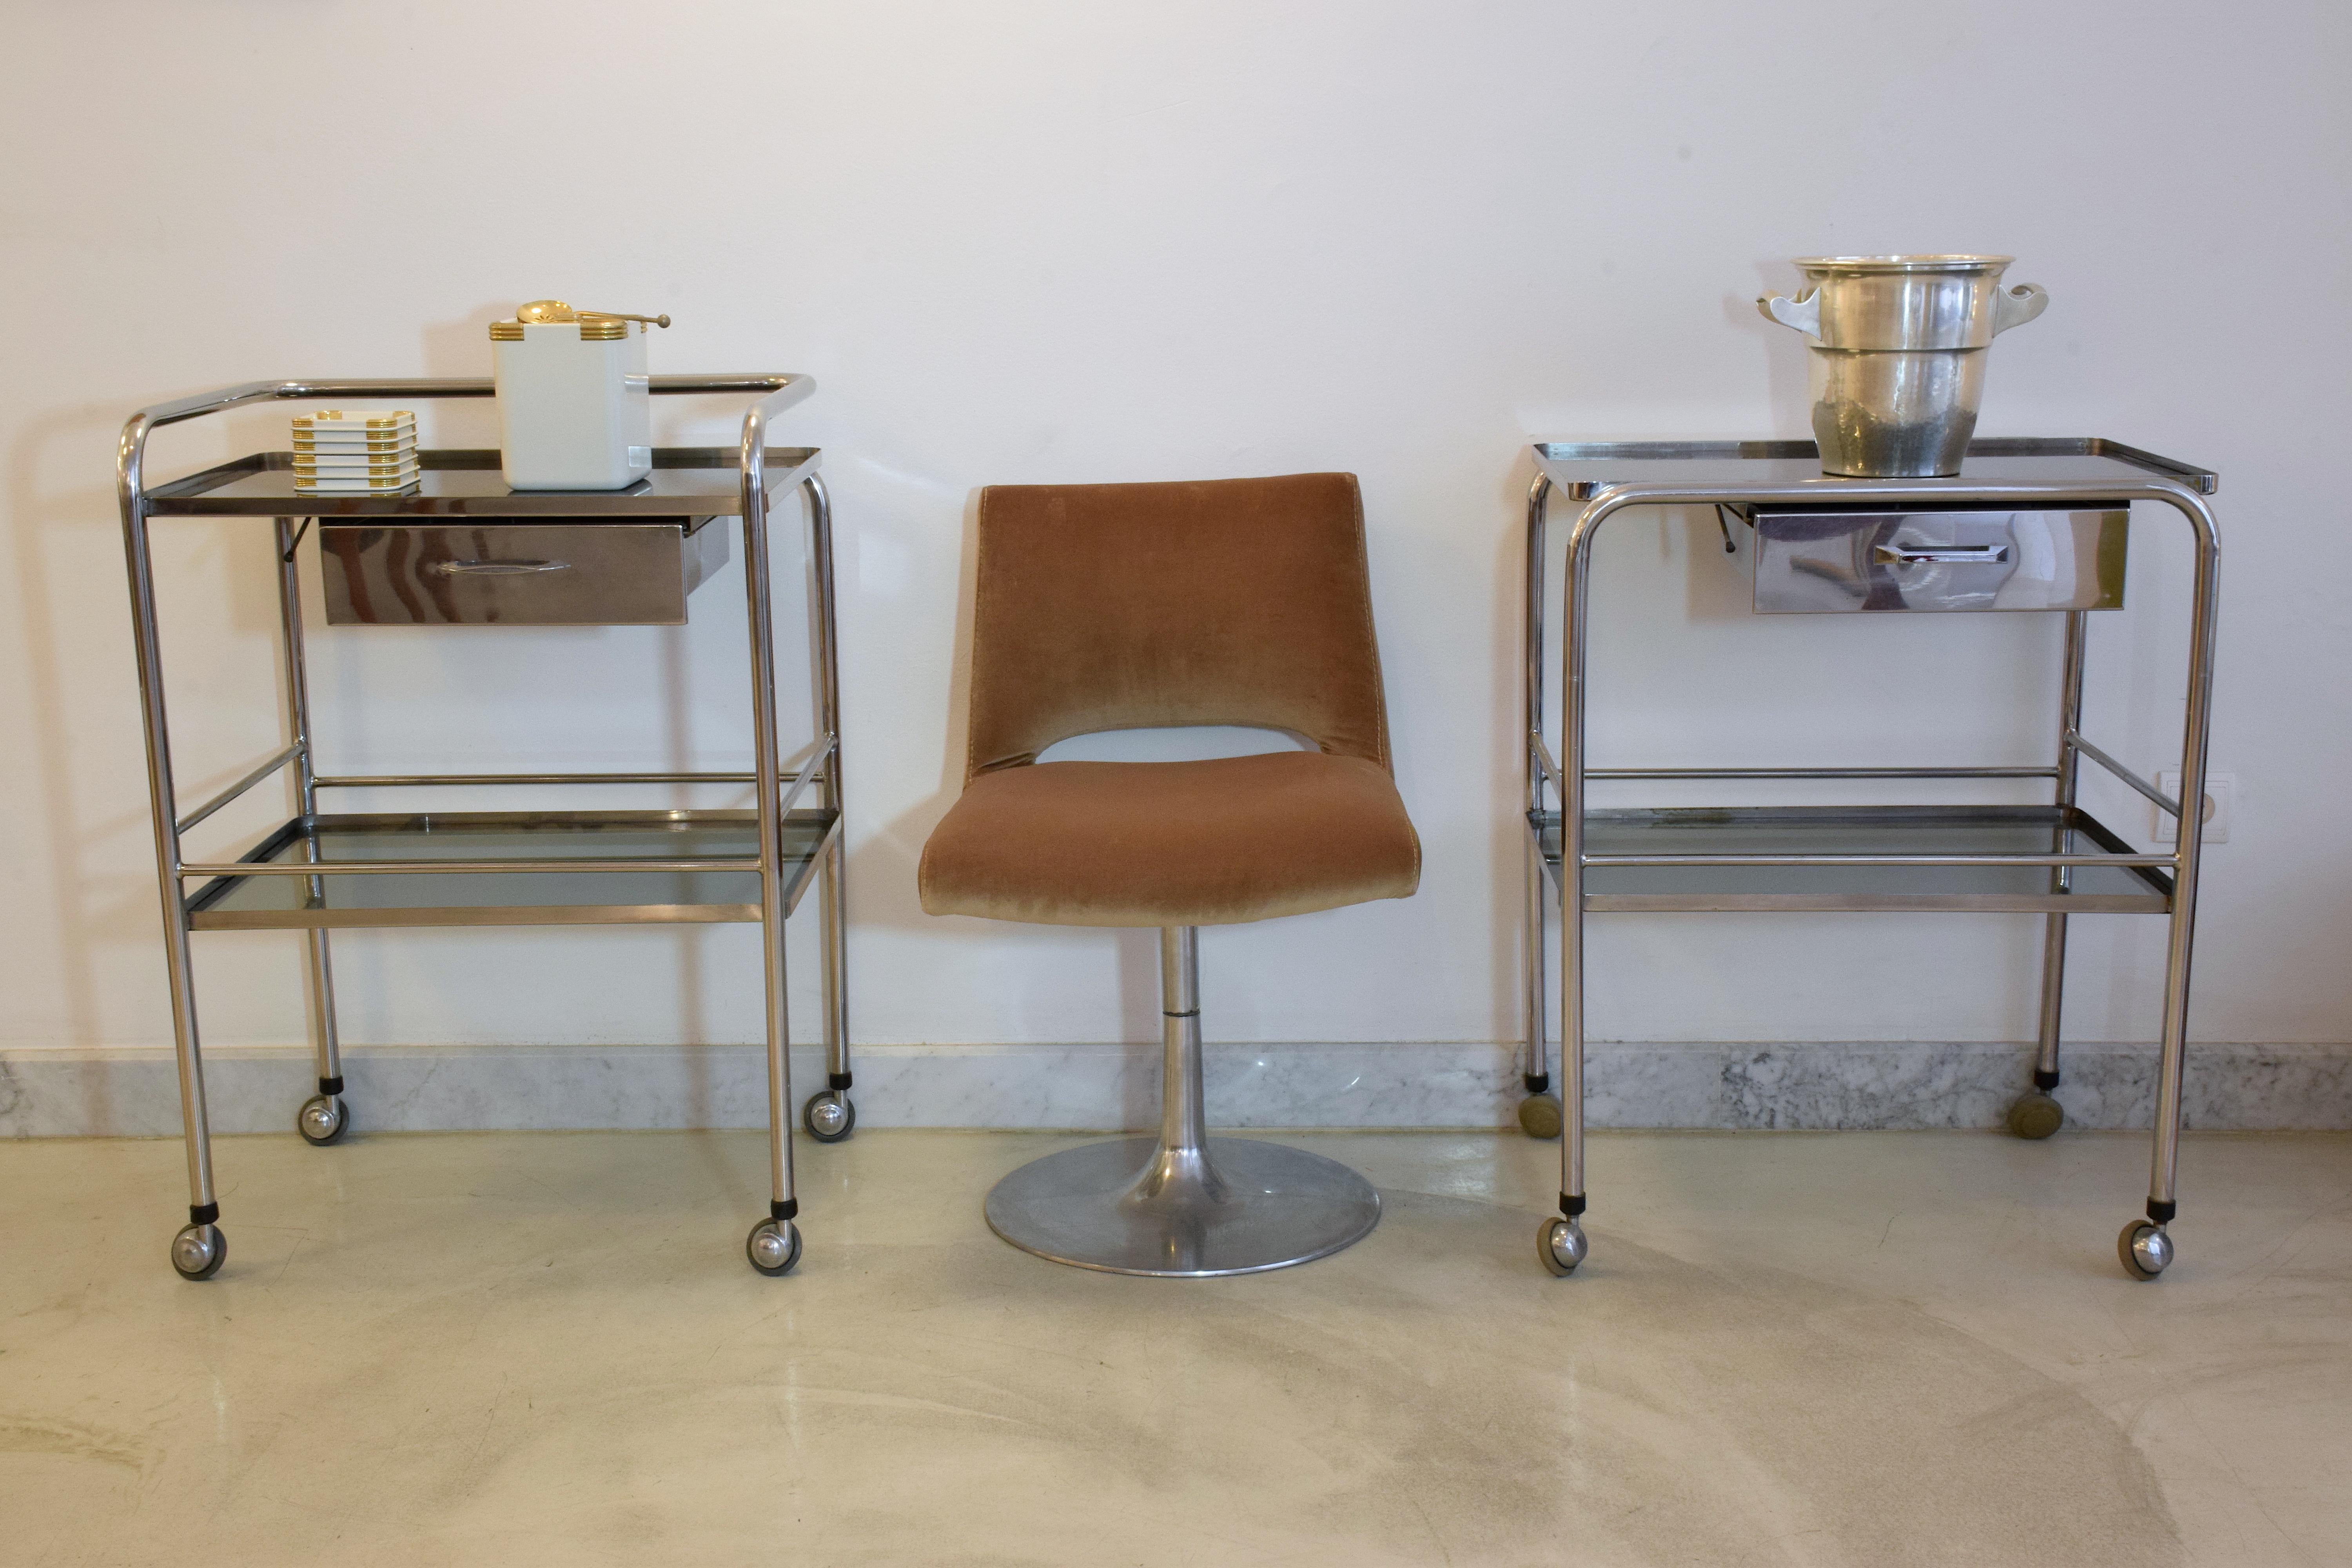 Stainless Steel French Vintage Steel Cabinet Cart with Shelves and Rollers, 1960s